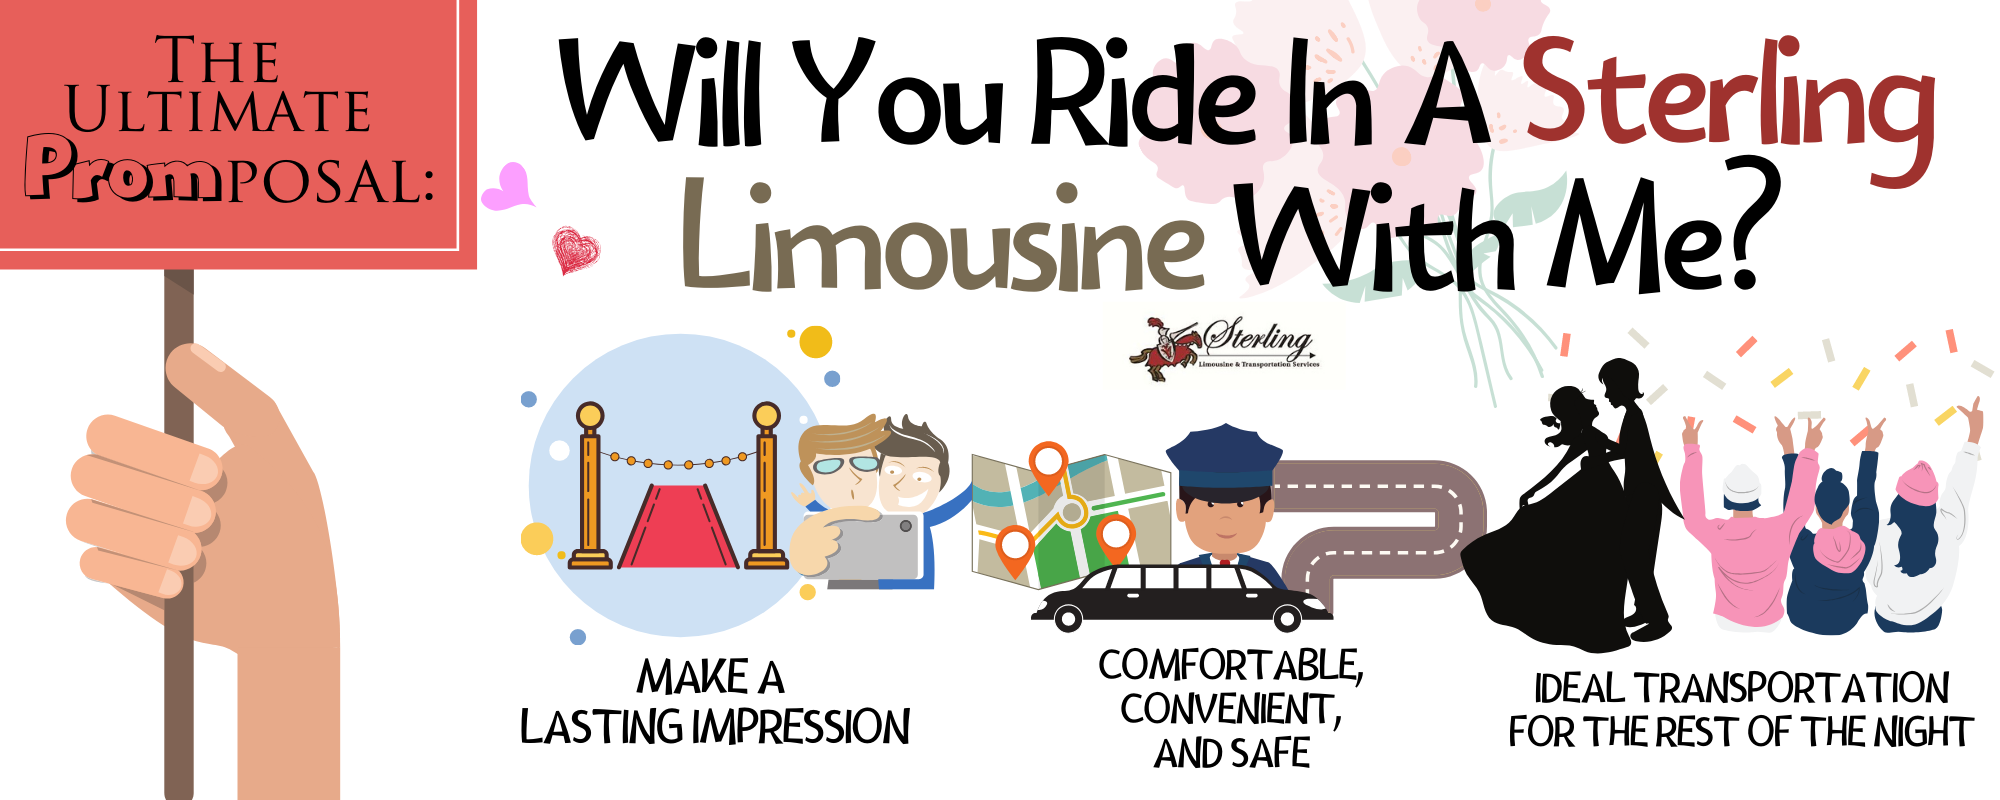 Infographic showing the benefits of riding to prom in a limousine